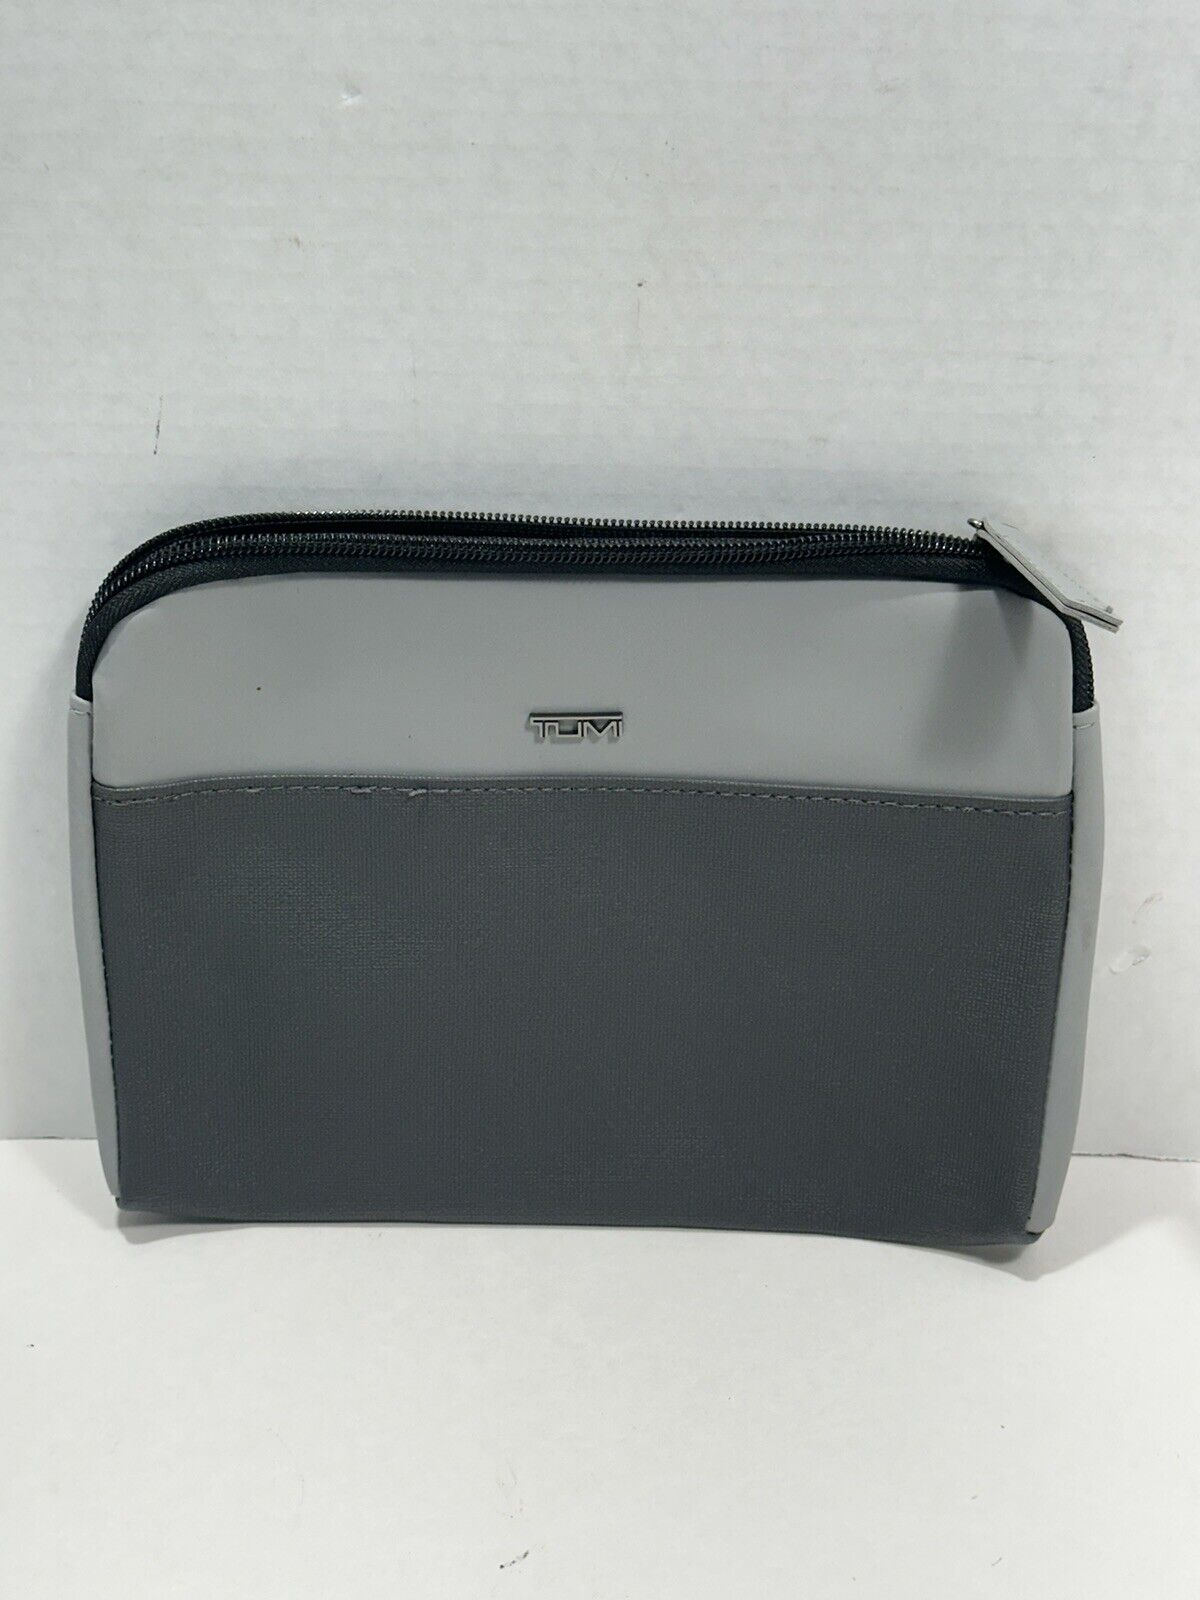 Tumi Delta One Business Class Soft Bag Gray Black  For Amenity Etc See Pictures